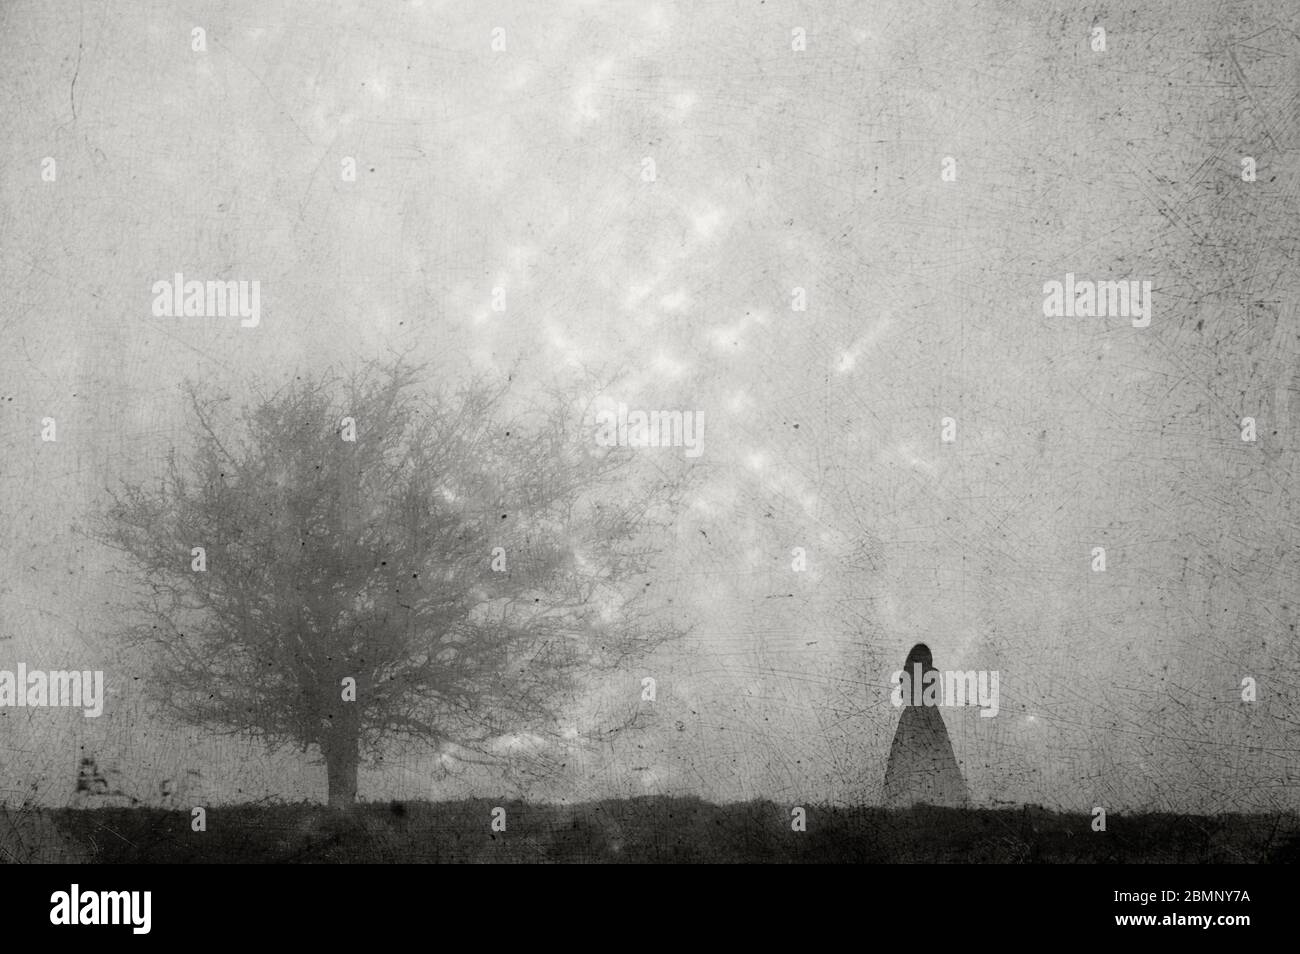 A ghostly transparent woman in a dress floating next to a tree. With a grunge, vintage textured edit. Stock Photo